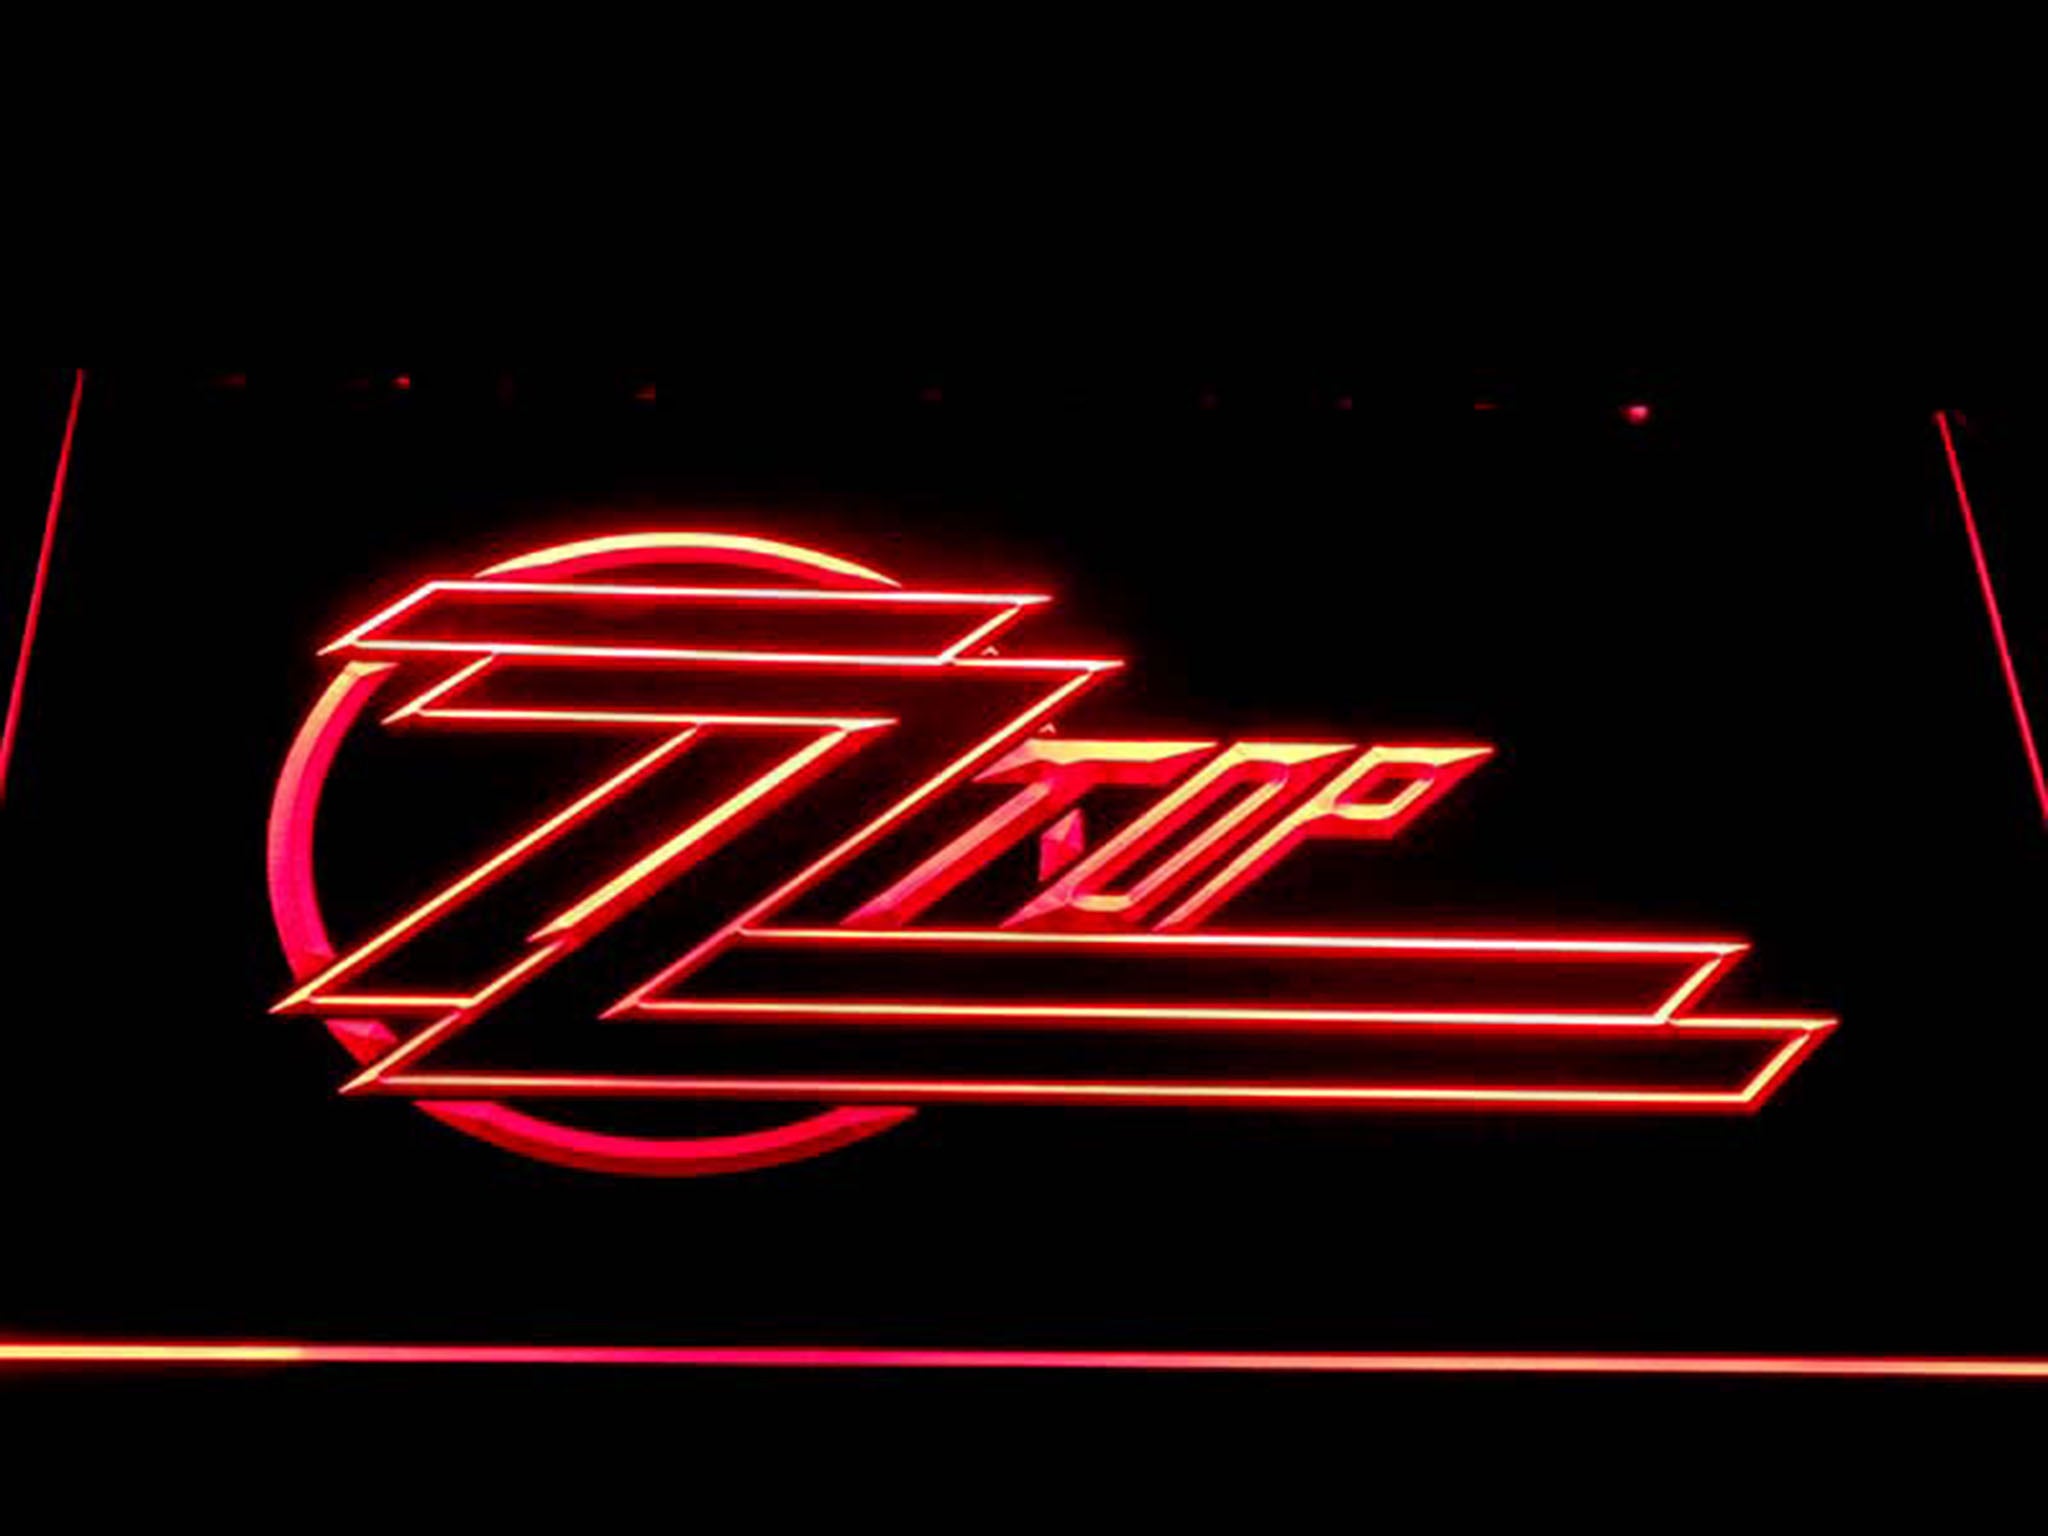 ZZ Top Rock Band LED Neon Sign